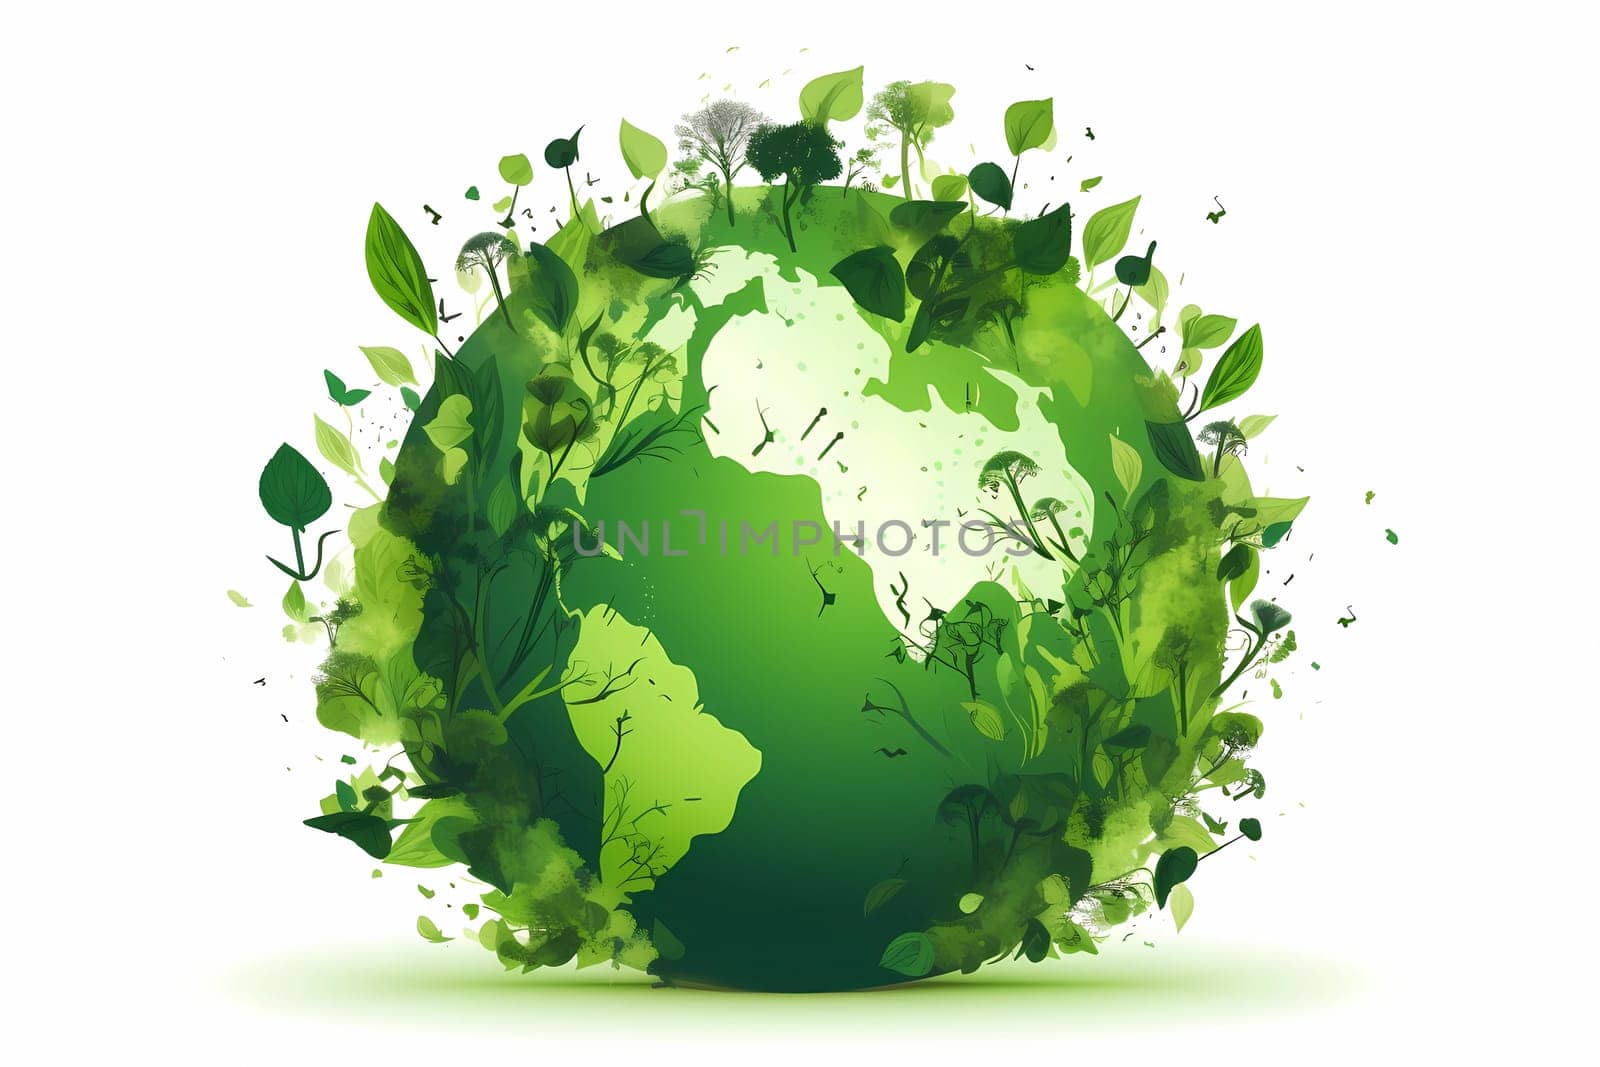 Green globe with the leaves and save the planet on it.